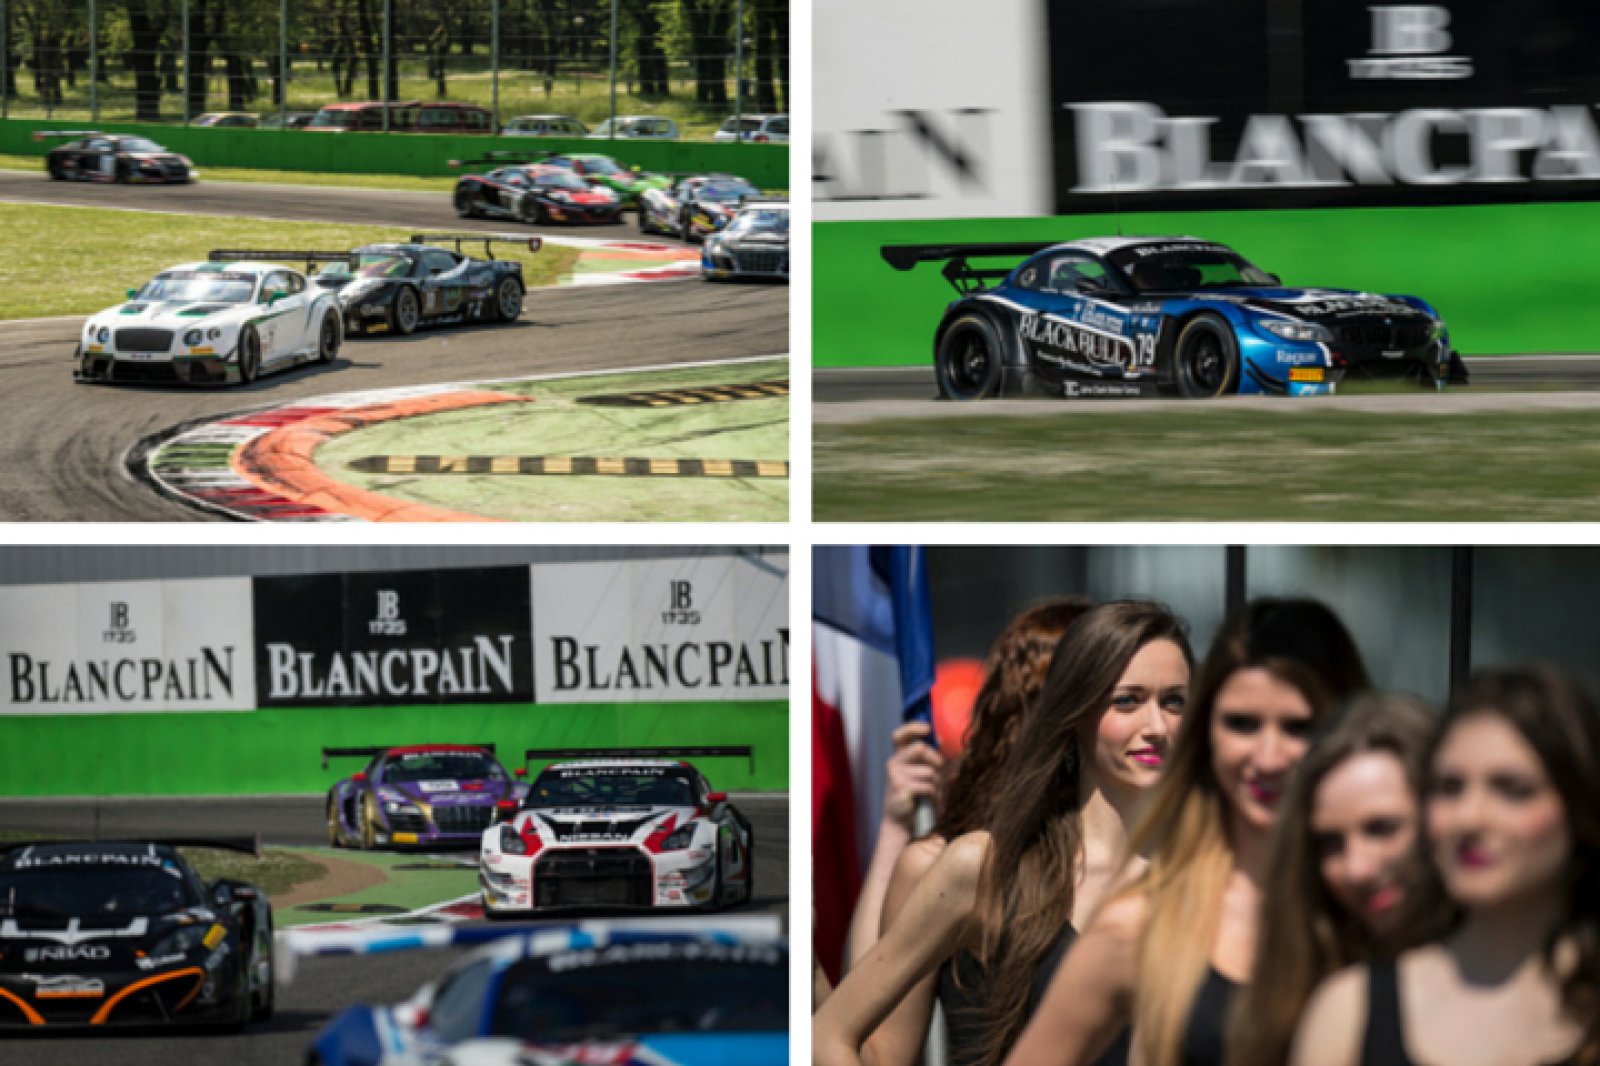 Blancpain Endurance ready for best season yet Fanatec GT World Challenge Europe by